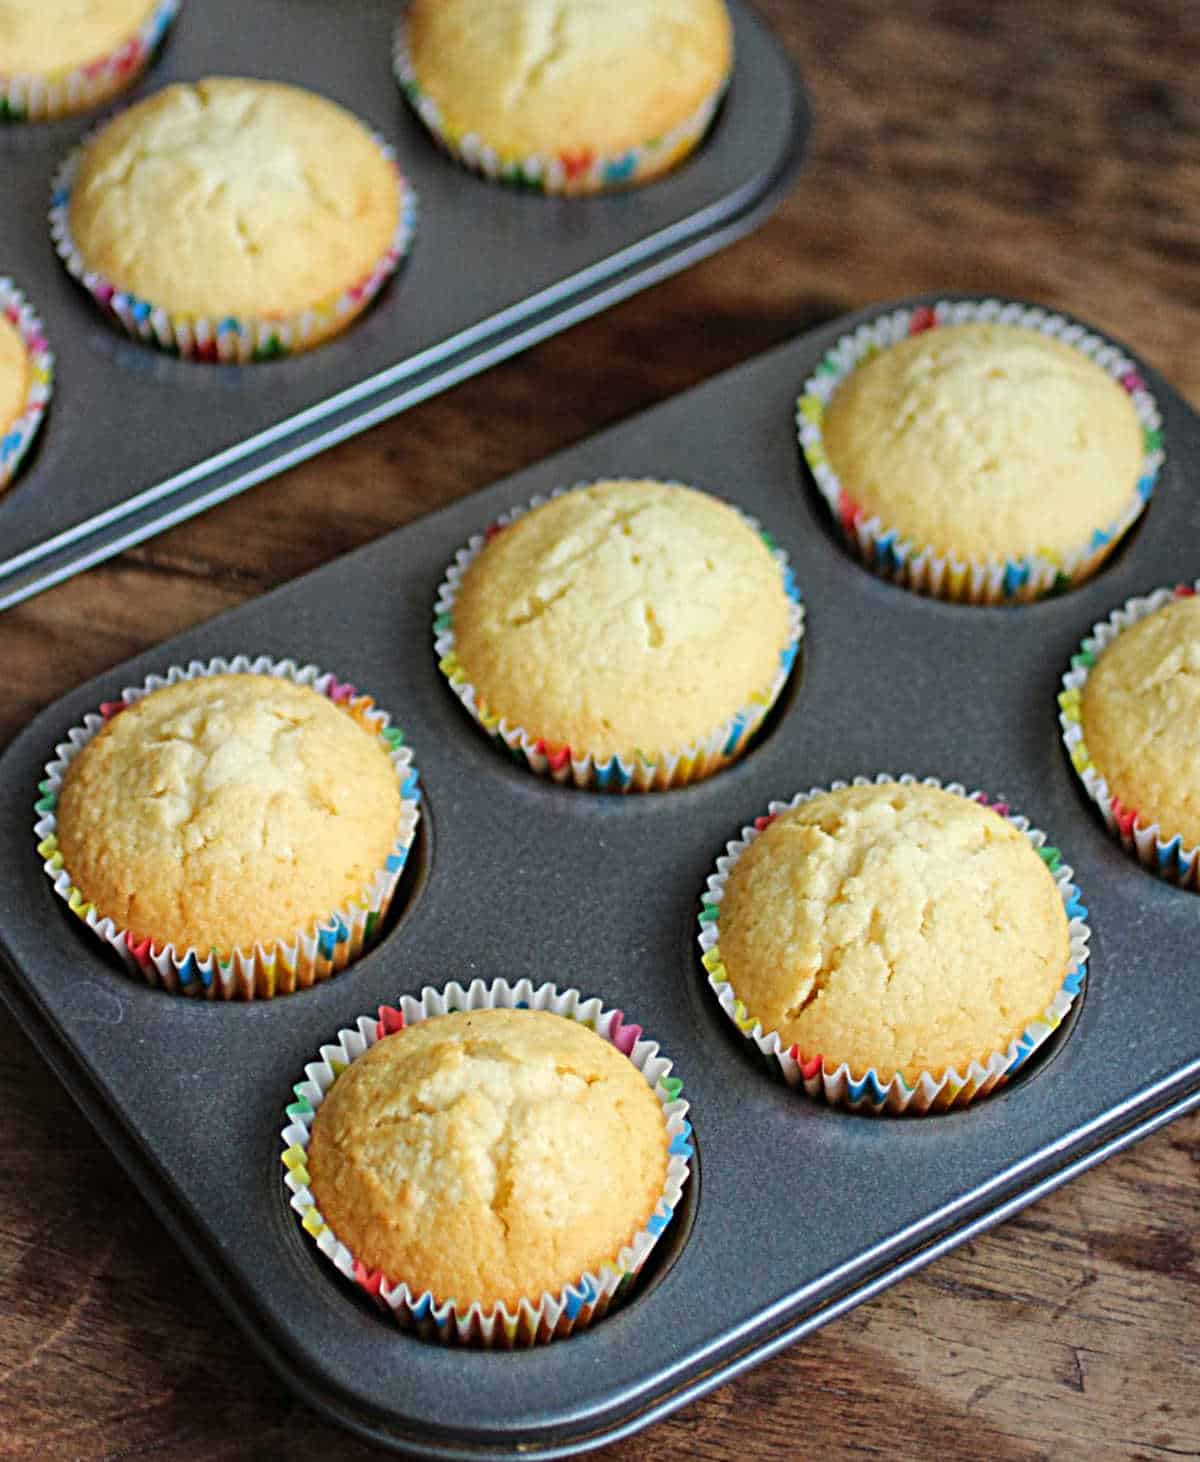 Top view of baked coconut cupcakes in metal muffin pans on wooden table